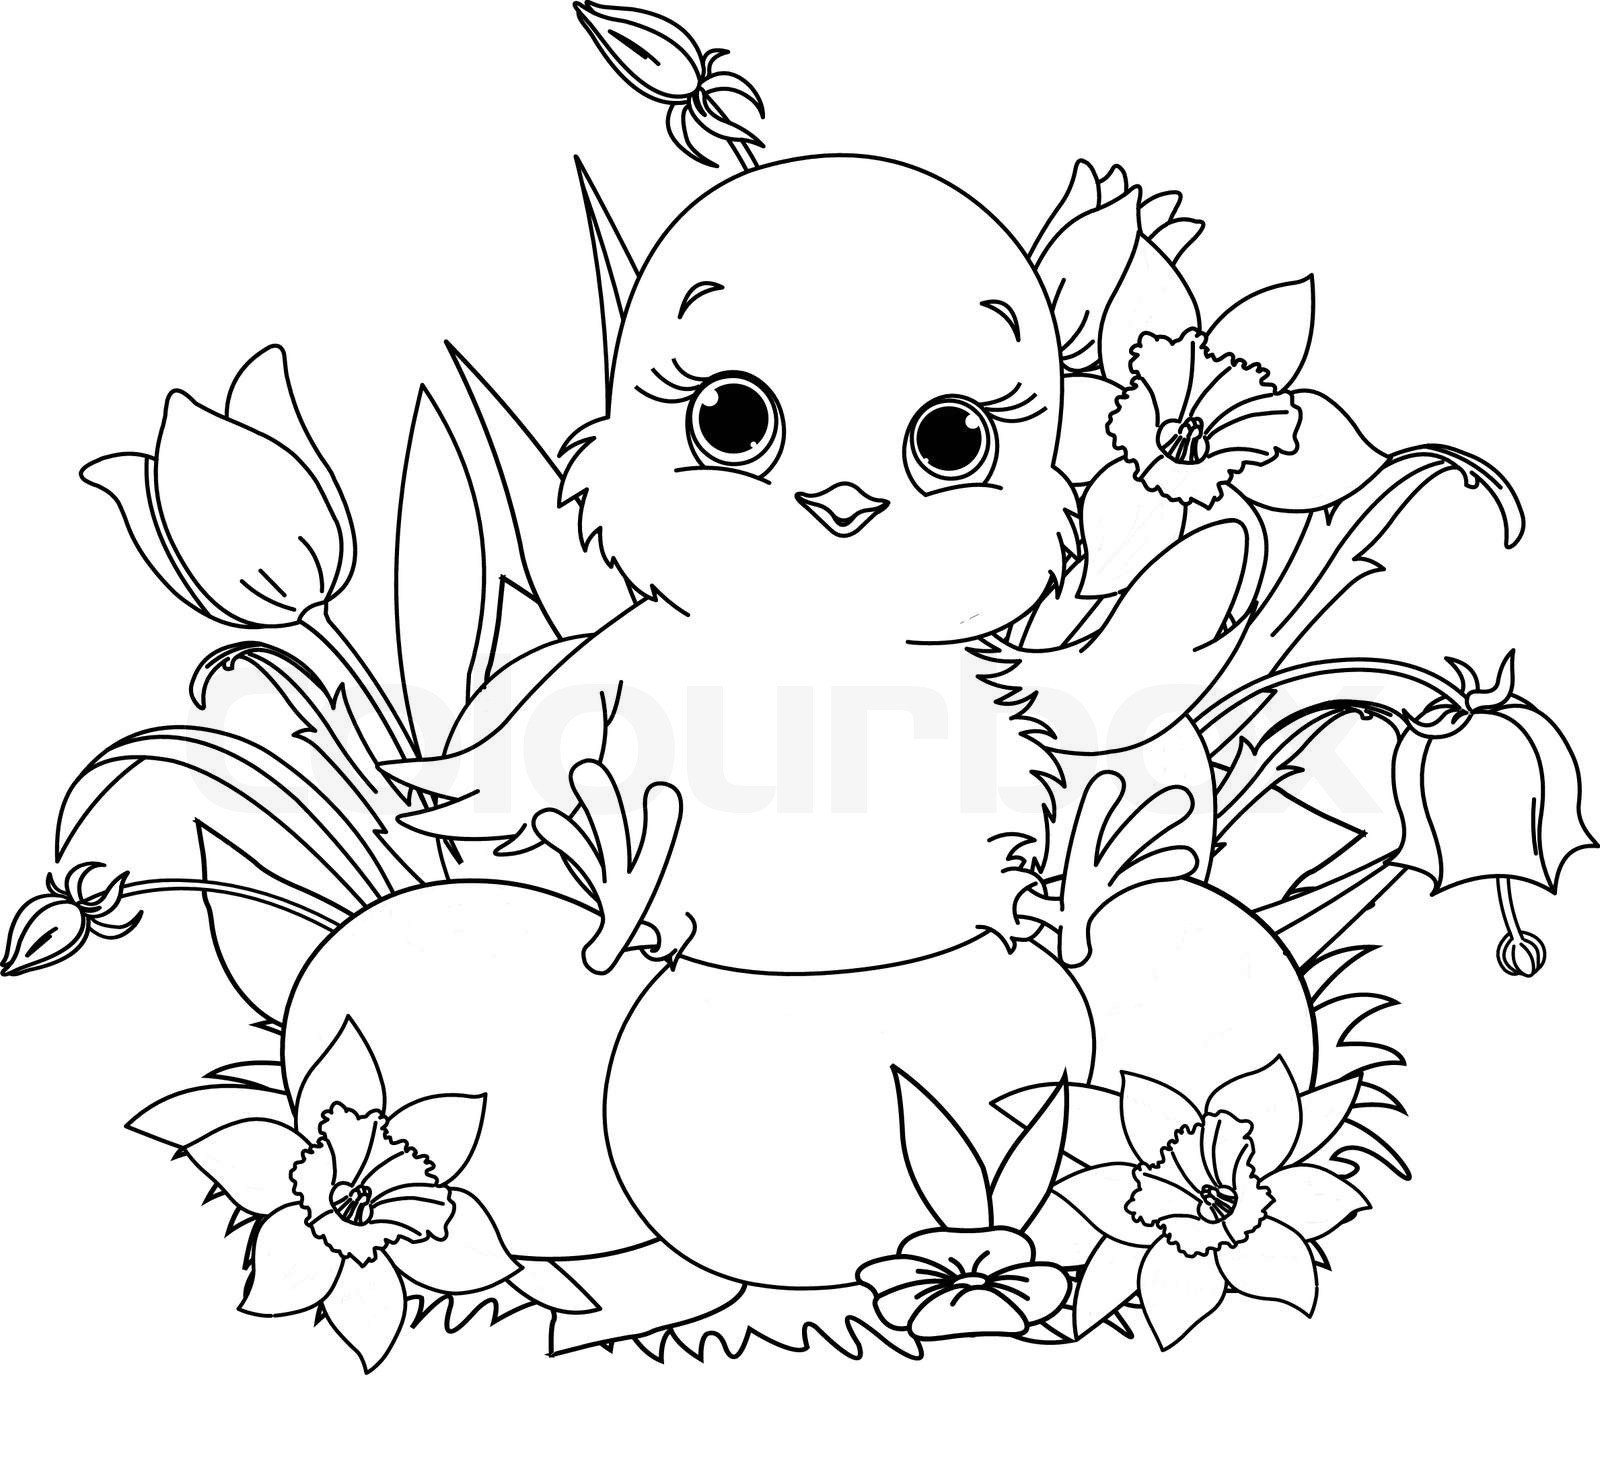 Newborn chick sitting on easter eggs coloring page stock vector